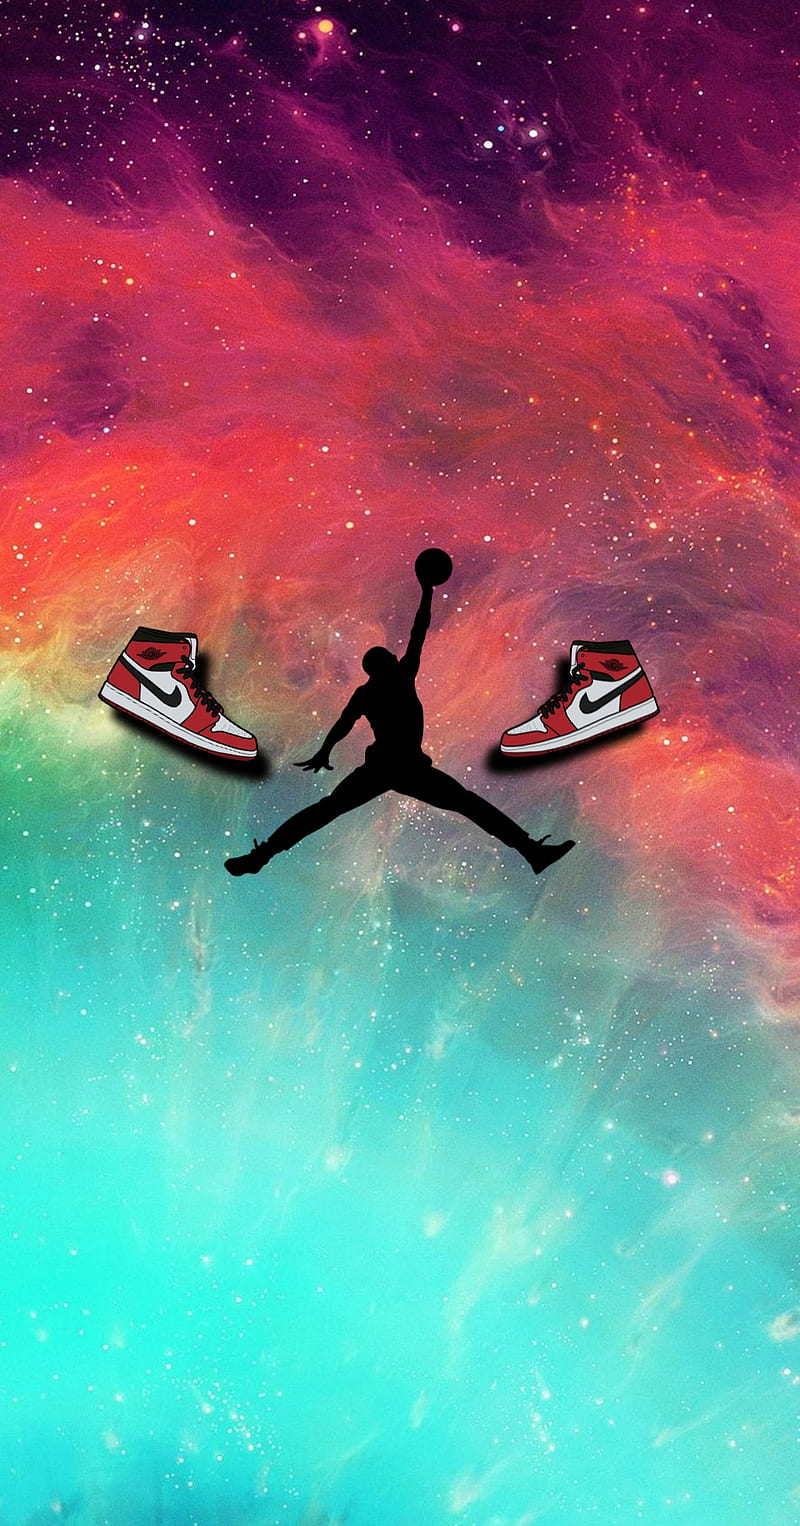 Basketball wallpapers and backgrounds download for free | Page 1